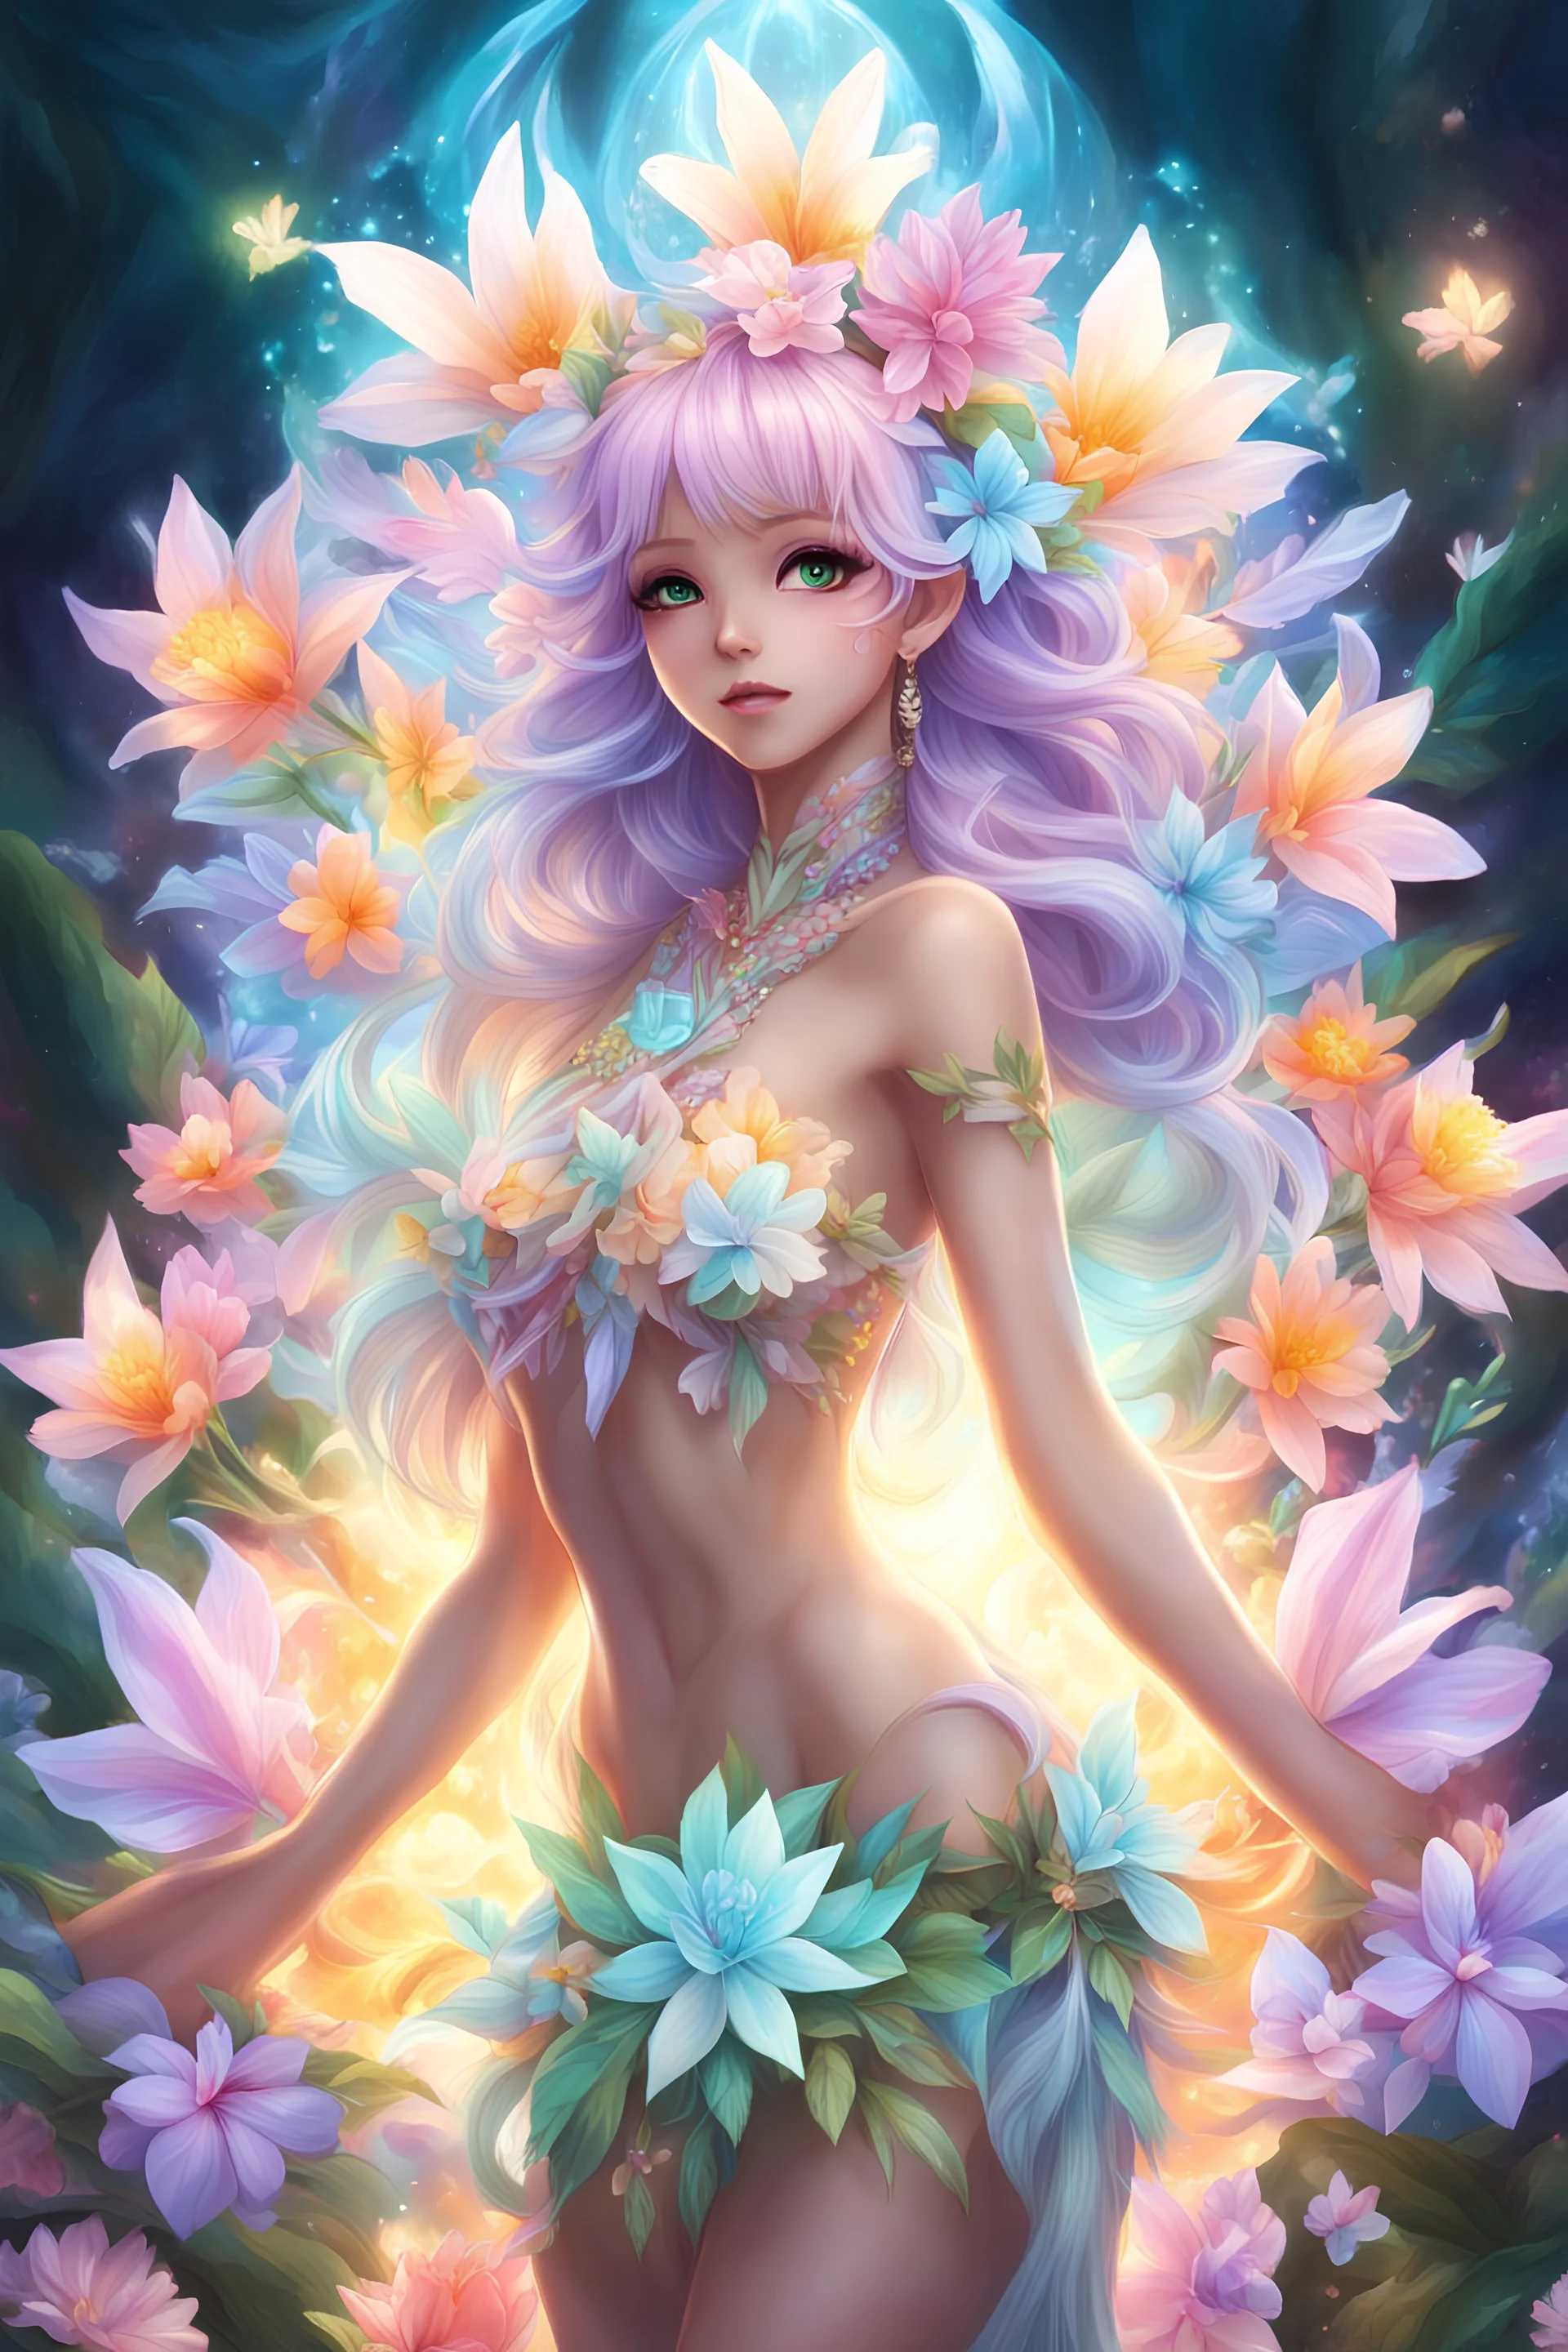 Anime hawaiian flower goddess casting a crystal flower spell light colors full body human anatomy bright glow and pastel hair